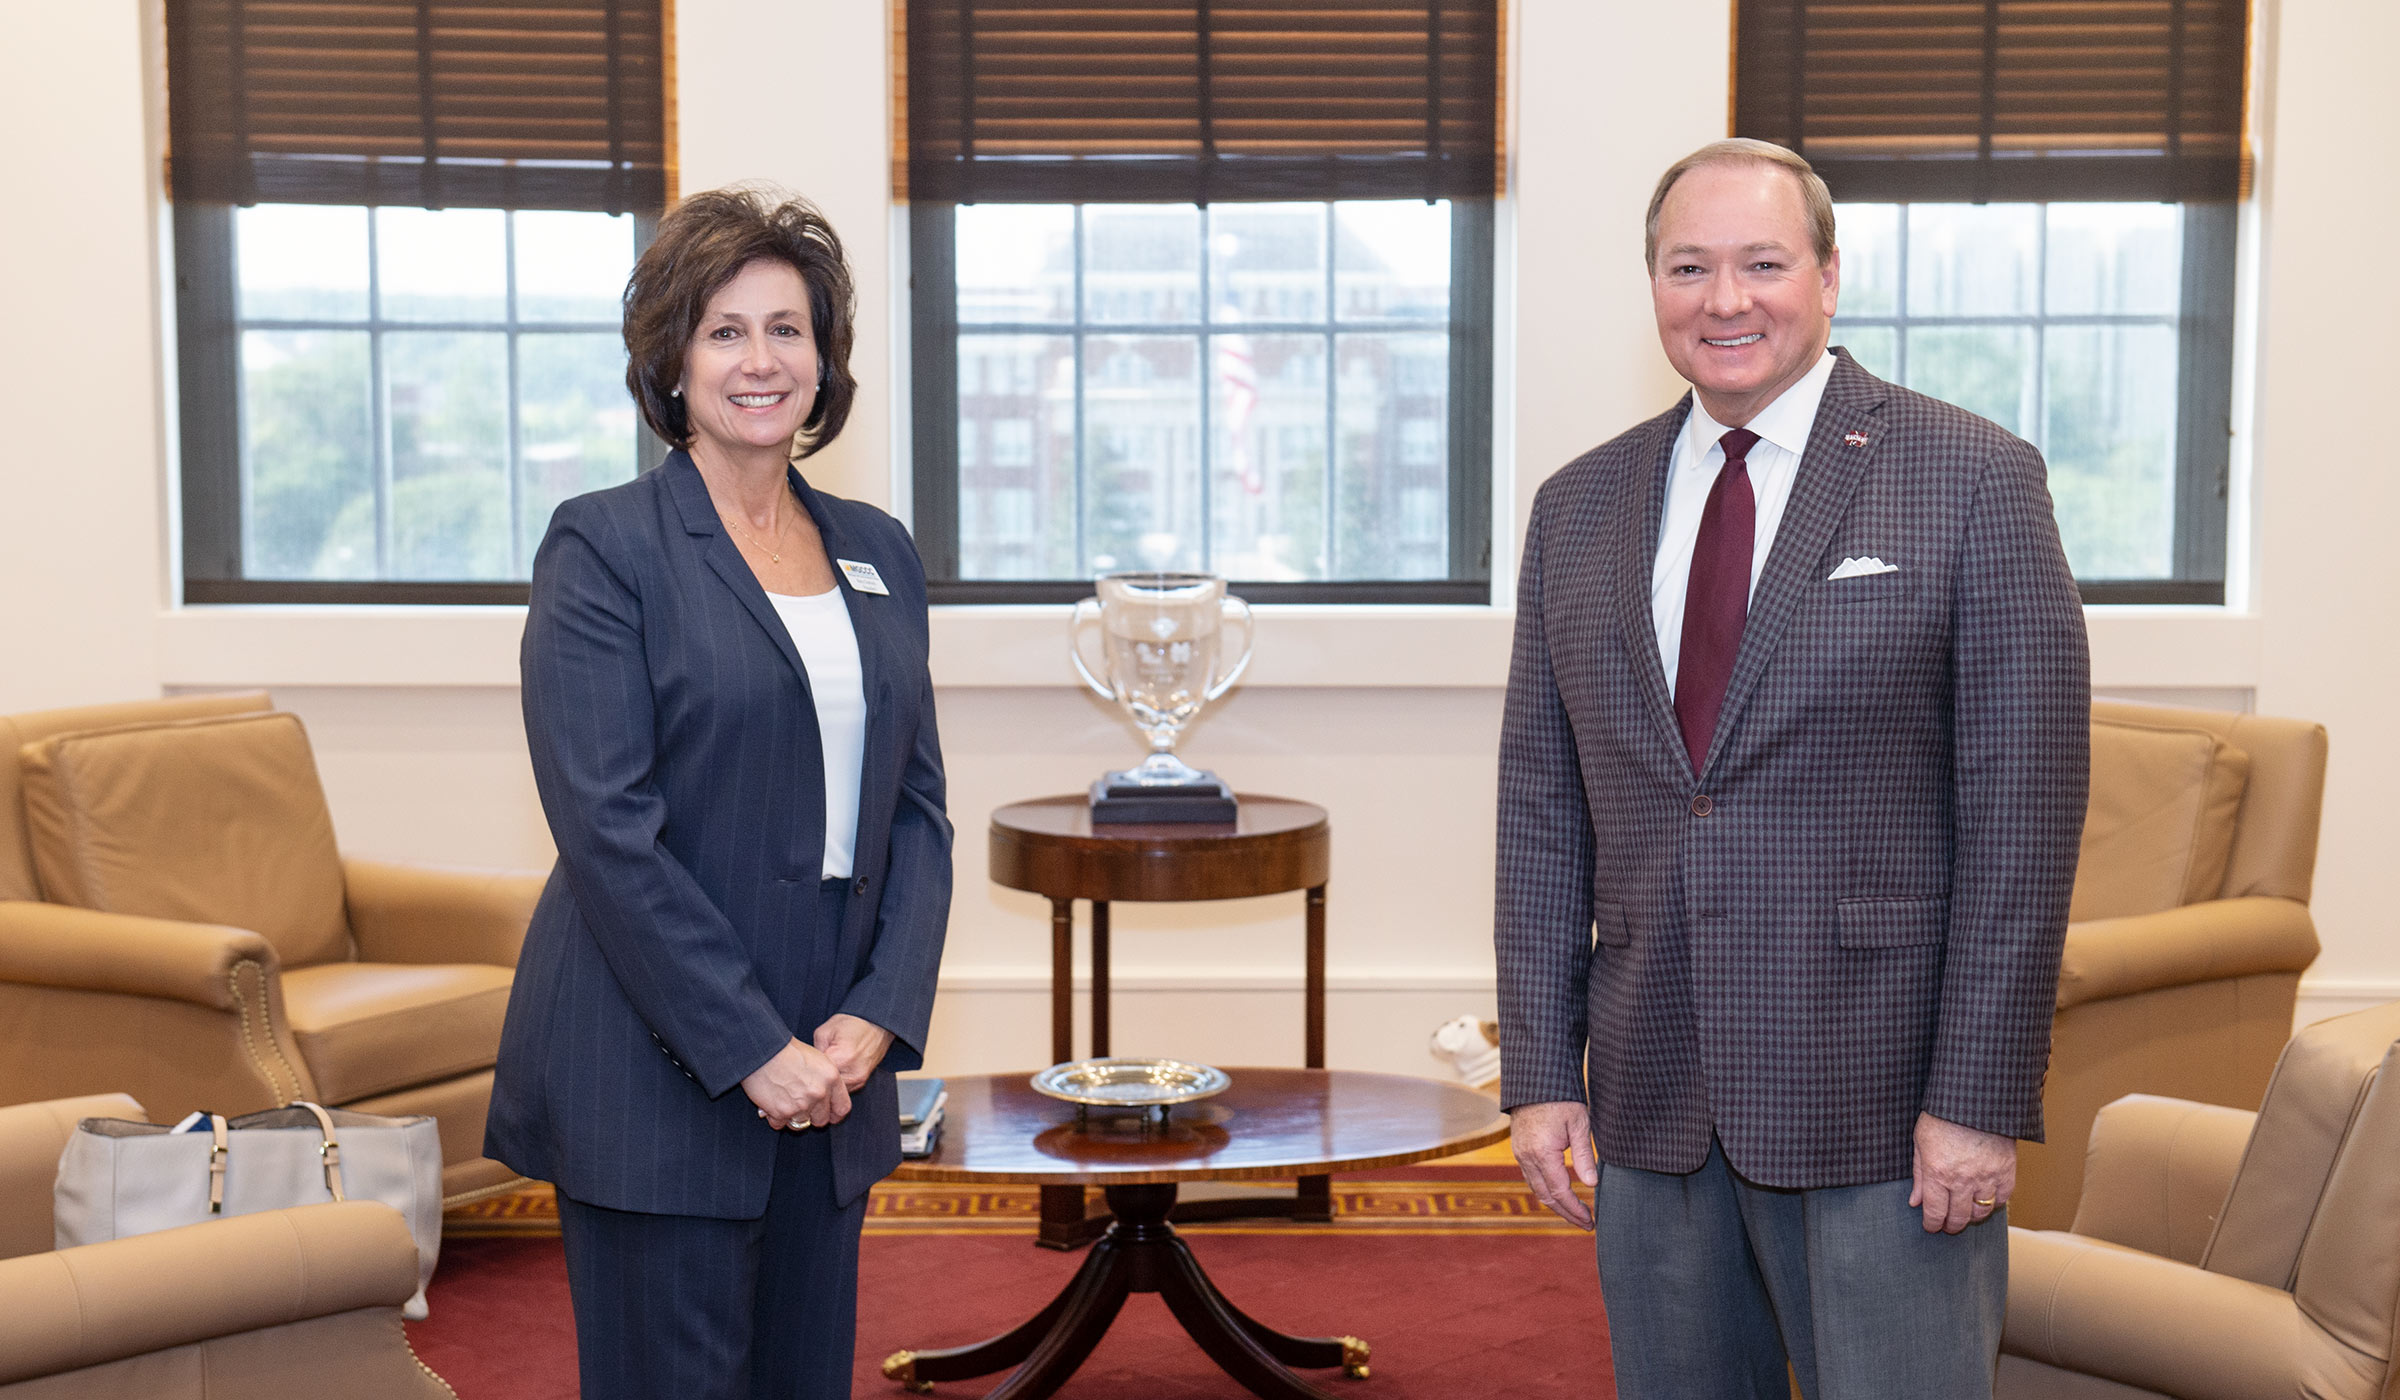 Mary Graham, president of Mississippi Gulf Coast Community College, poses for a photo with President Keenum in the Presidential Suite.